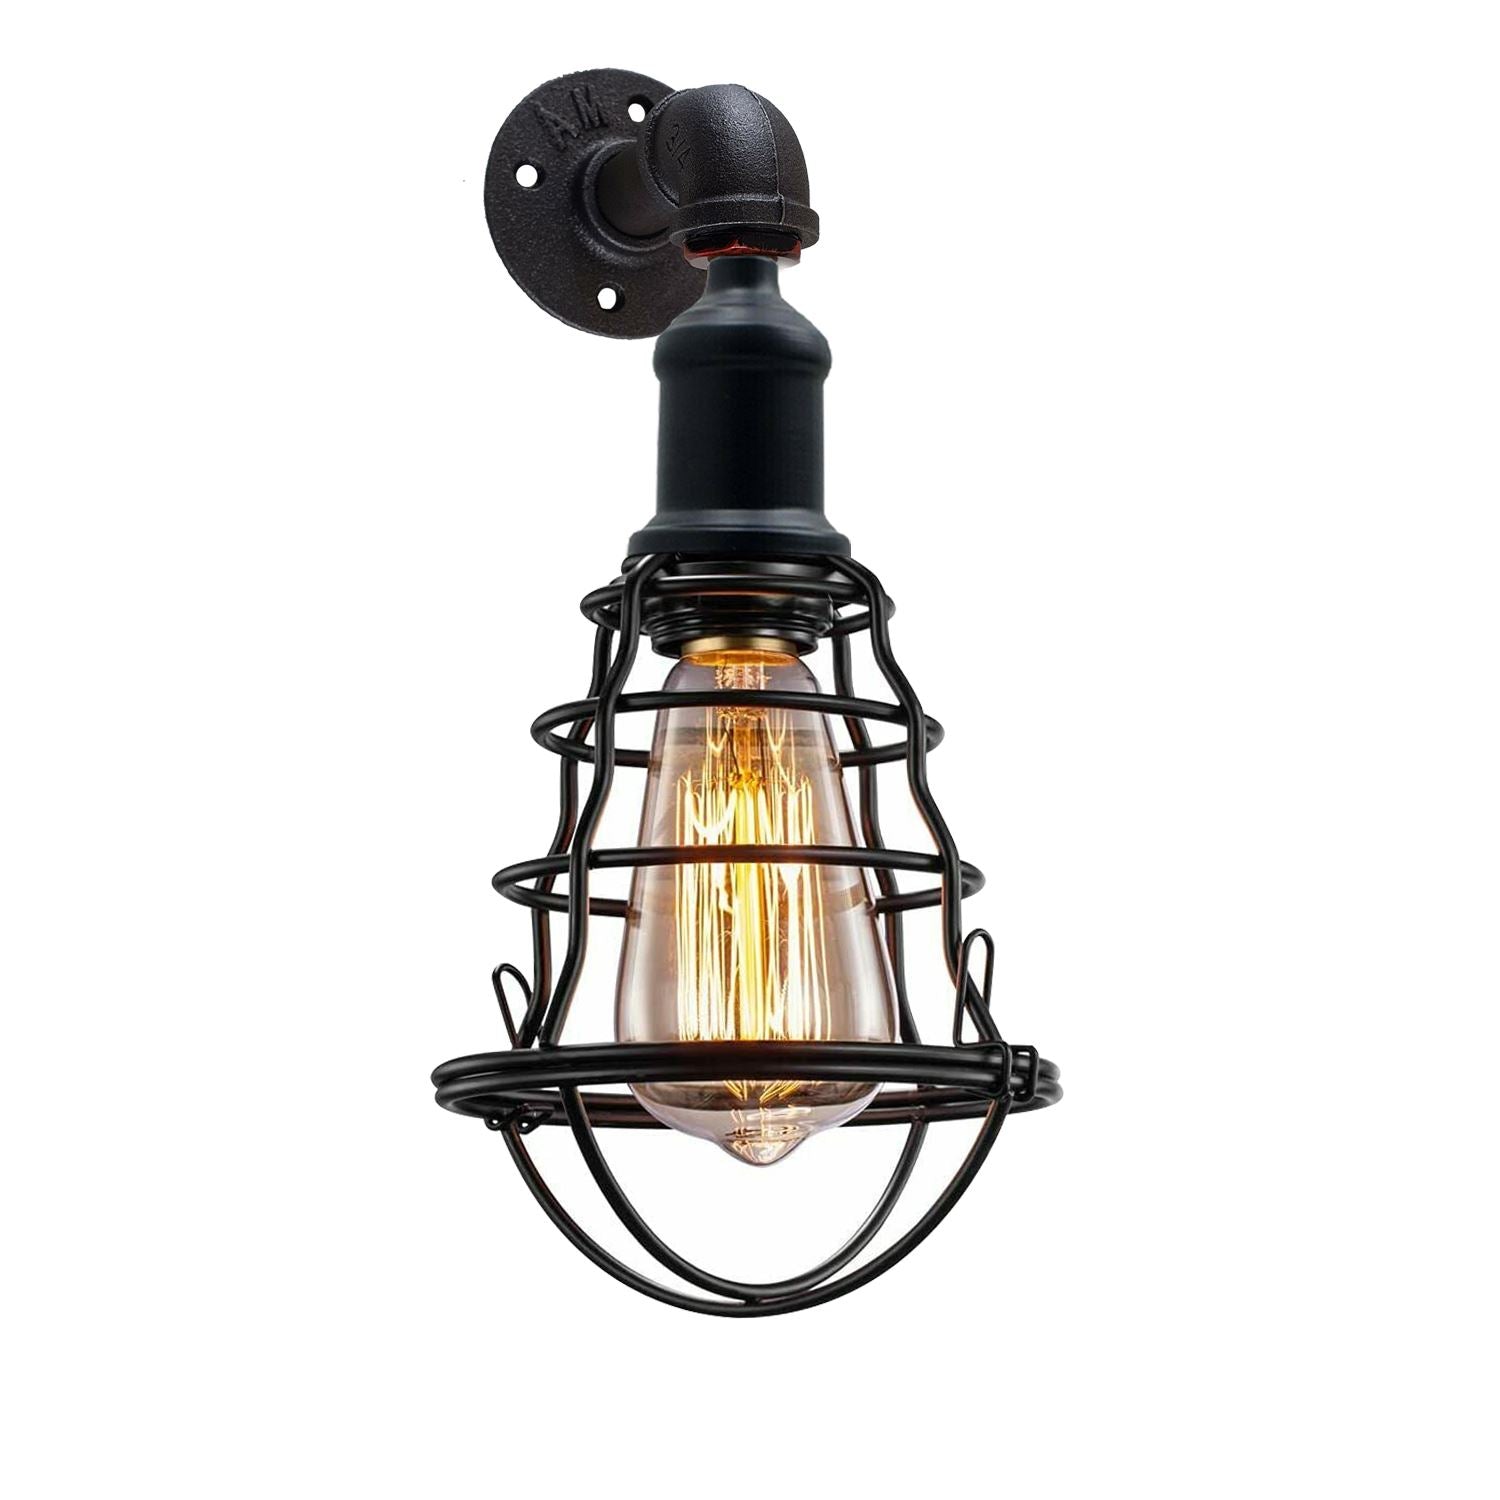 Modern Wall Sconce Lamp Industrial Rustic Metal Water Pipe Finish - Retro Wall Mount Fixture~1246 - LEDSone UK Ltd